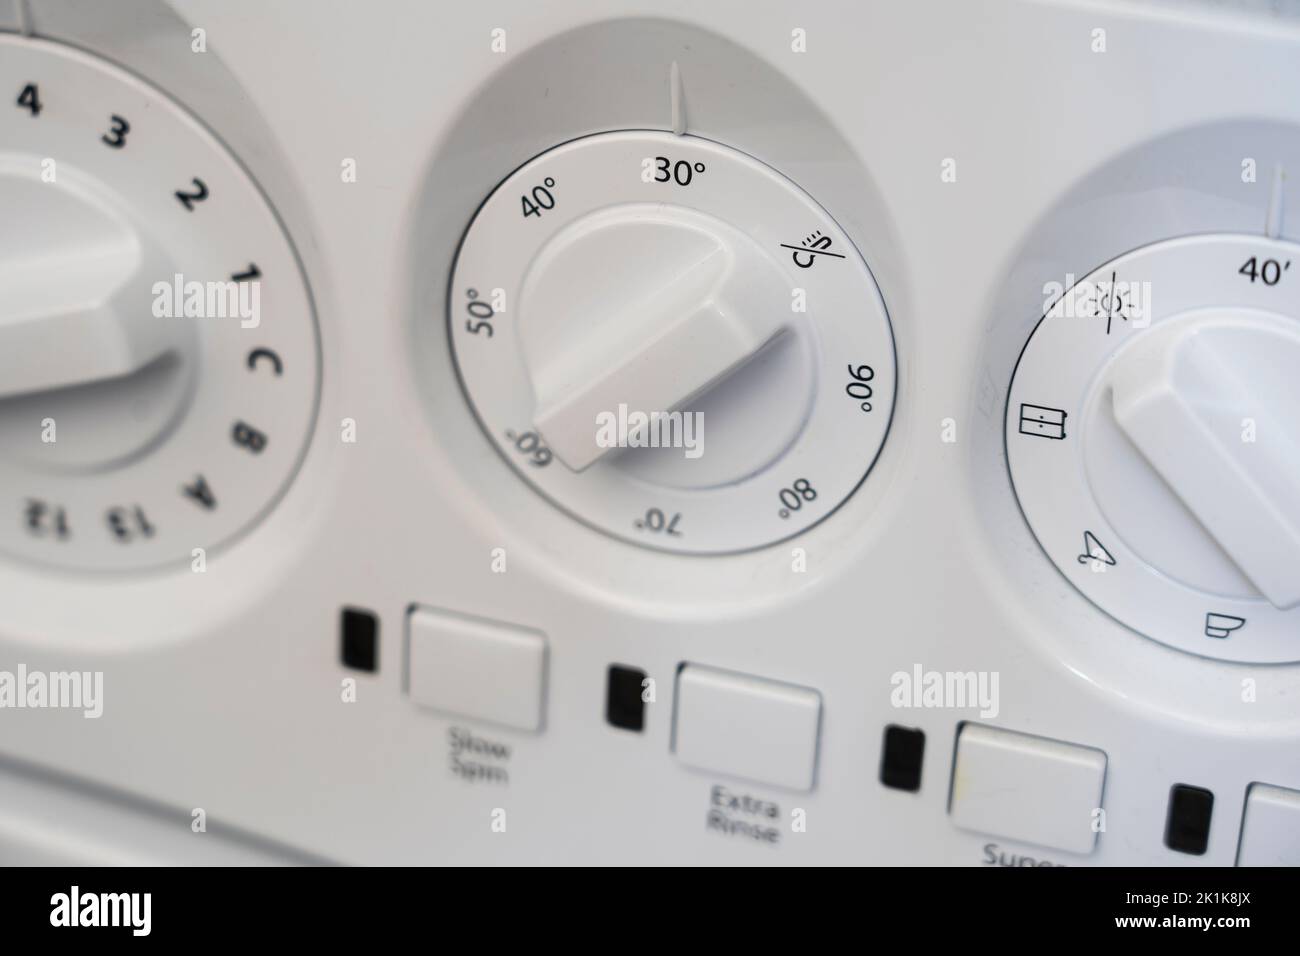 Close up 30 degrees on a washing machine buttons and dials. Concept - do the laundry, energy saving, electricity price, peak demand, energy efficiency Stock Photo